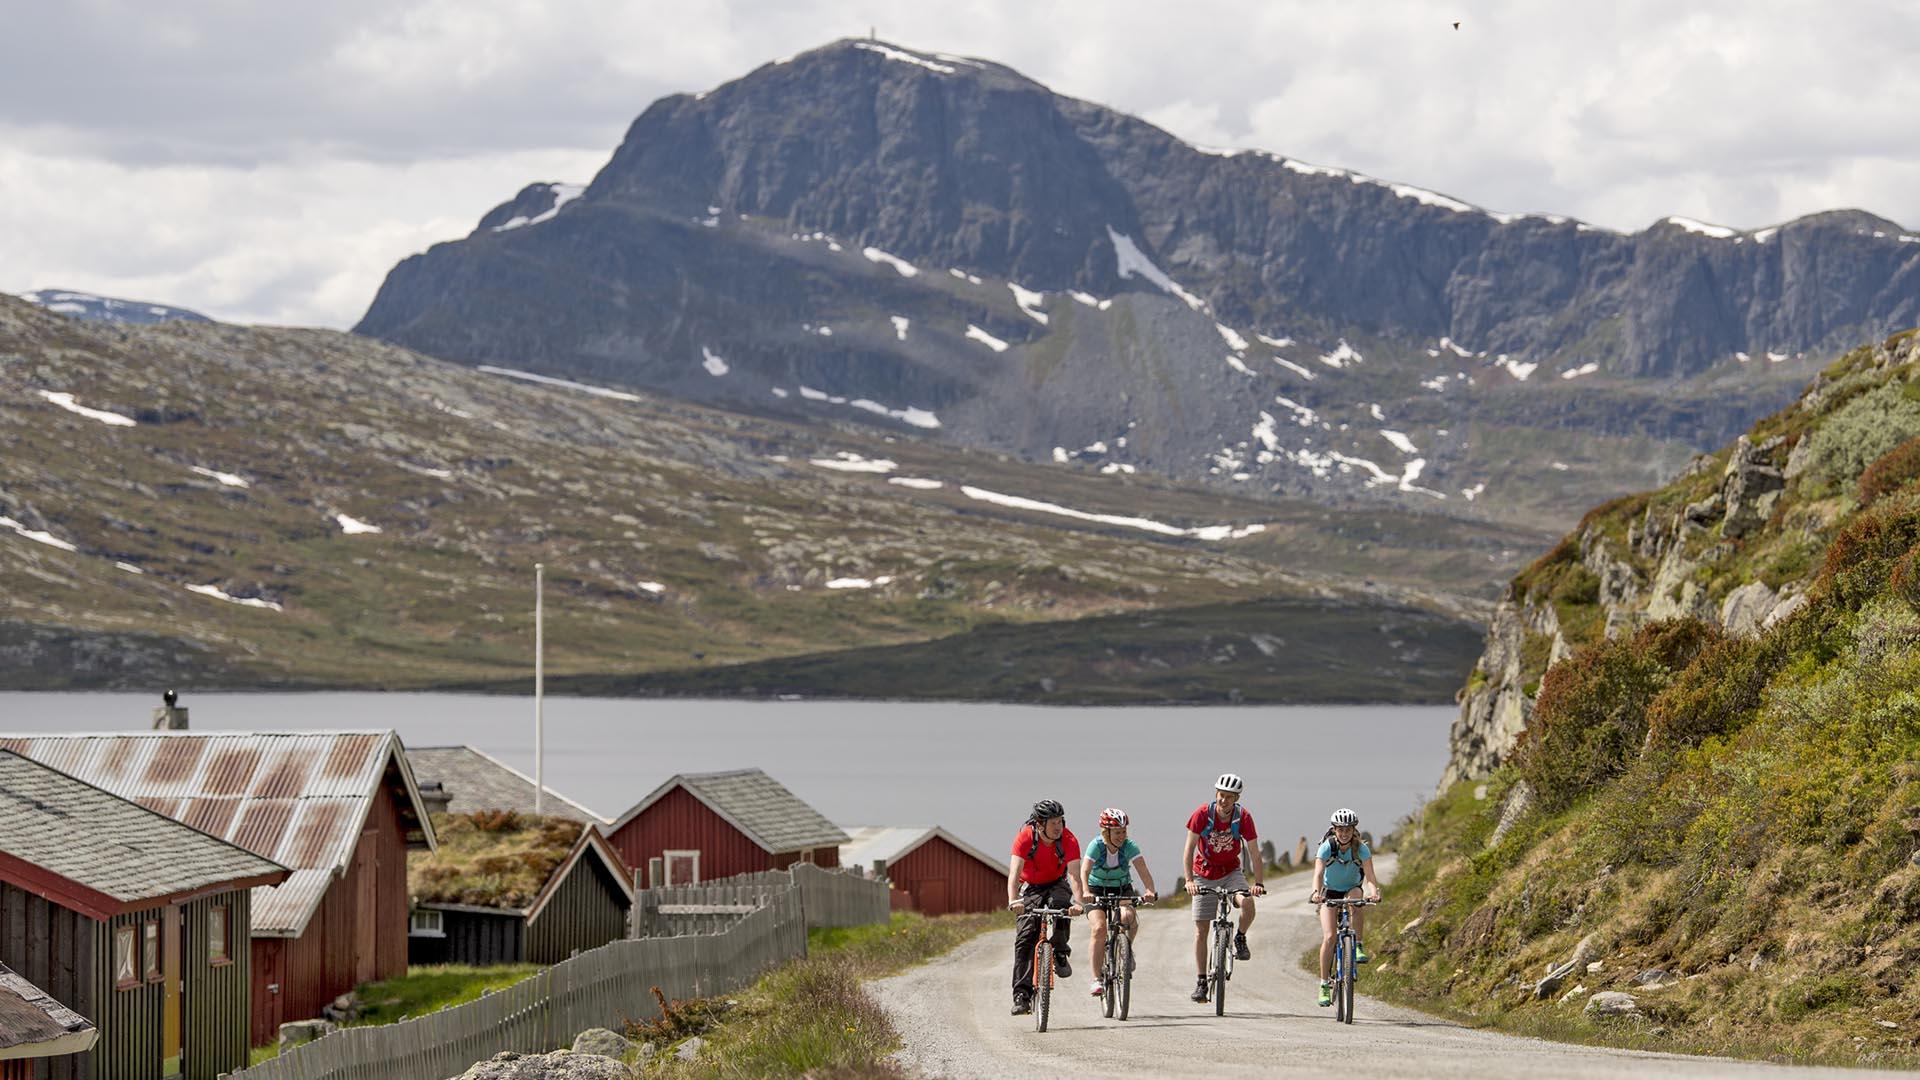 Four cyclists on a gravel road in the high mountains turning around a bend. On the right side of the road there's a rock cliff, on the other some red farm houses. Behind that is a lake, and a high mountain dominates the background.